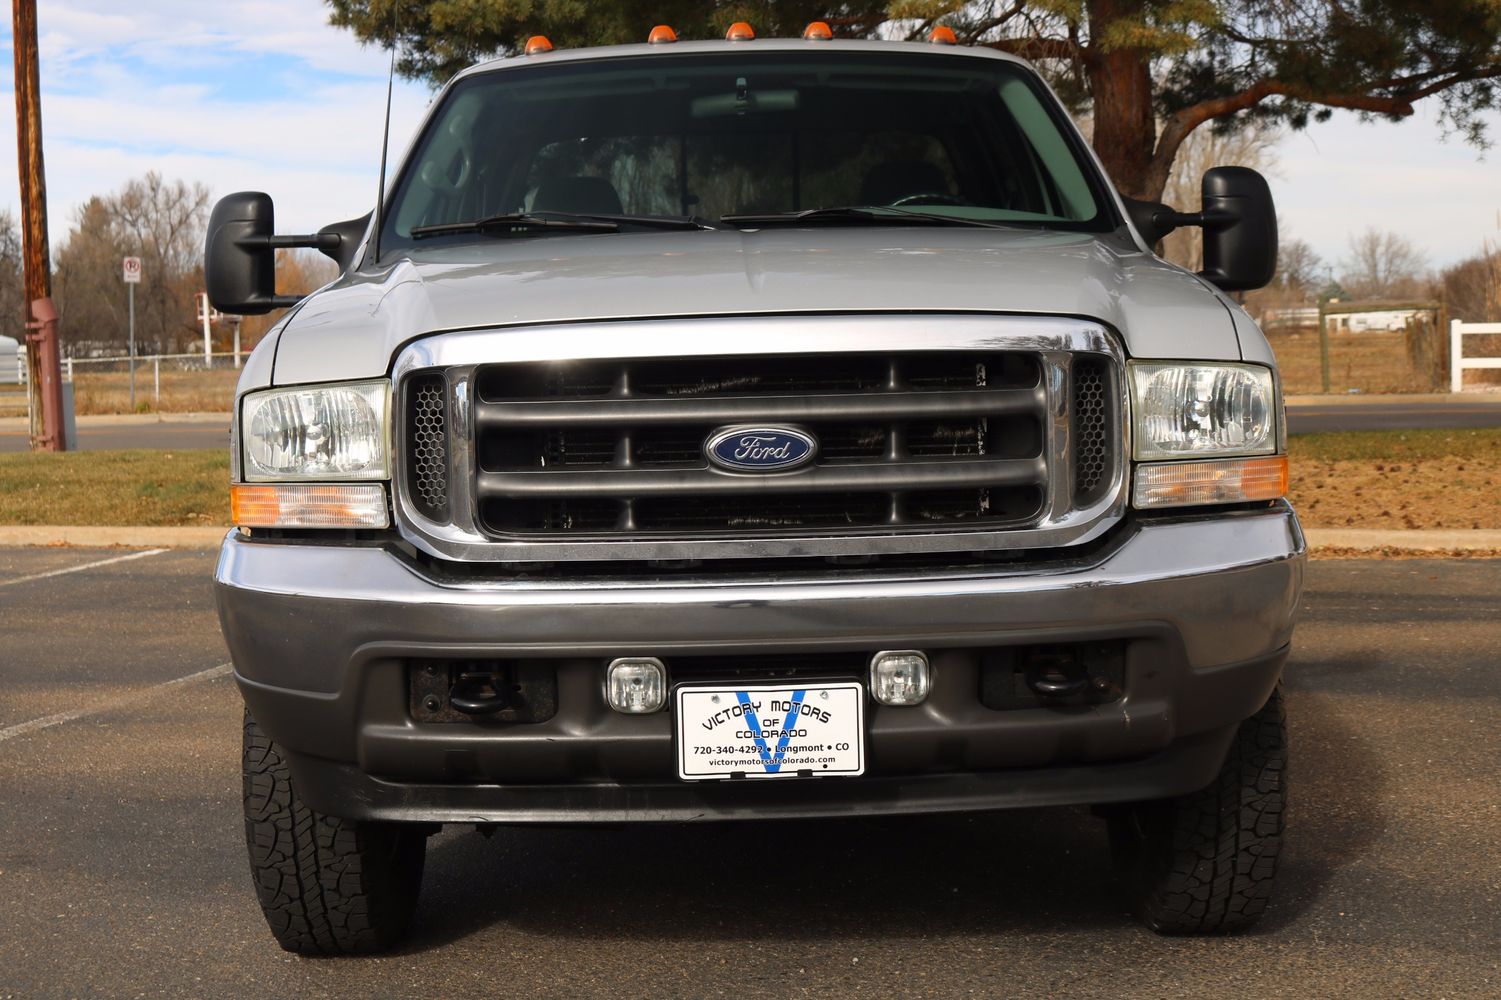 2002 Ford F-250 Super Duty XLT | Victory Motors of Colorado 2002 Ford F250 Super Duty 5.4 Towing Capacity